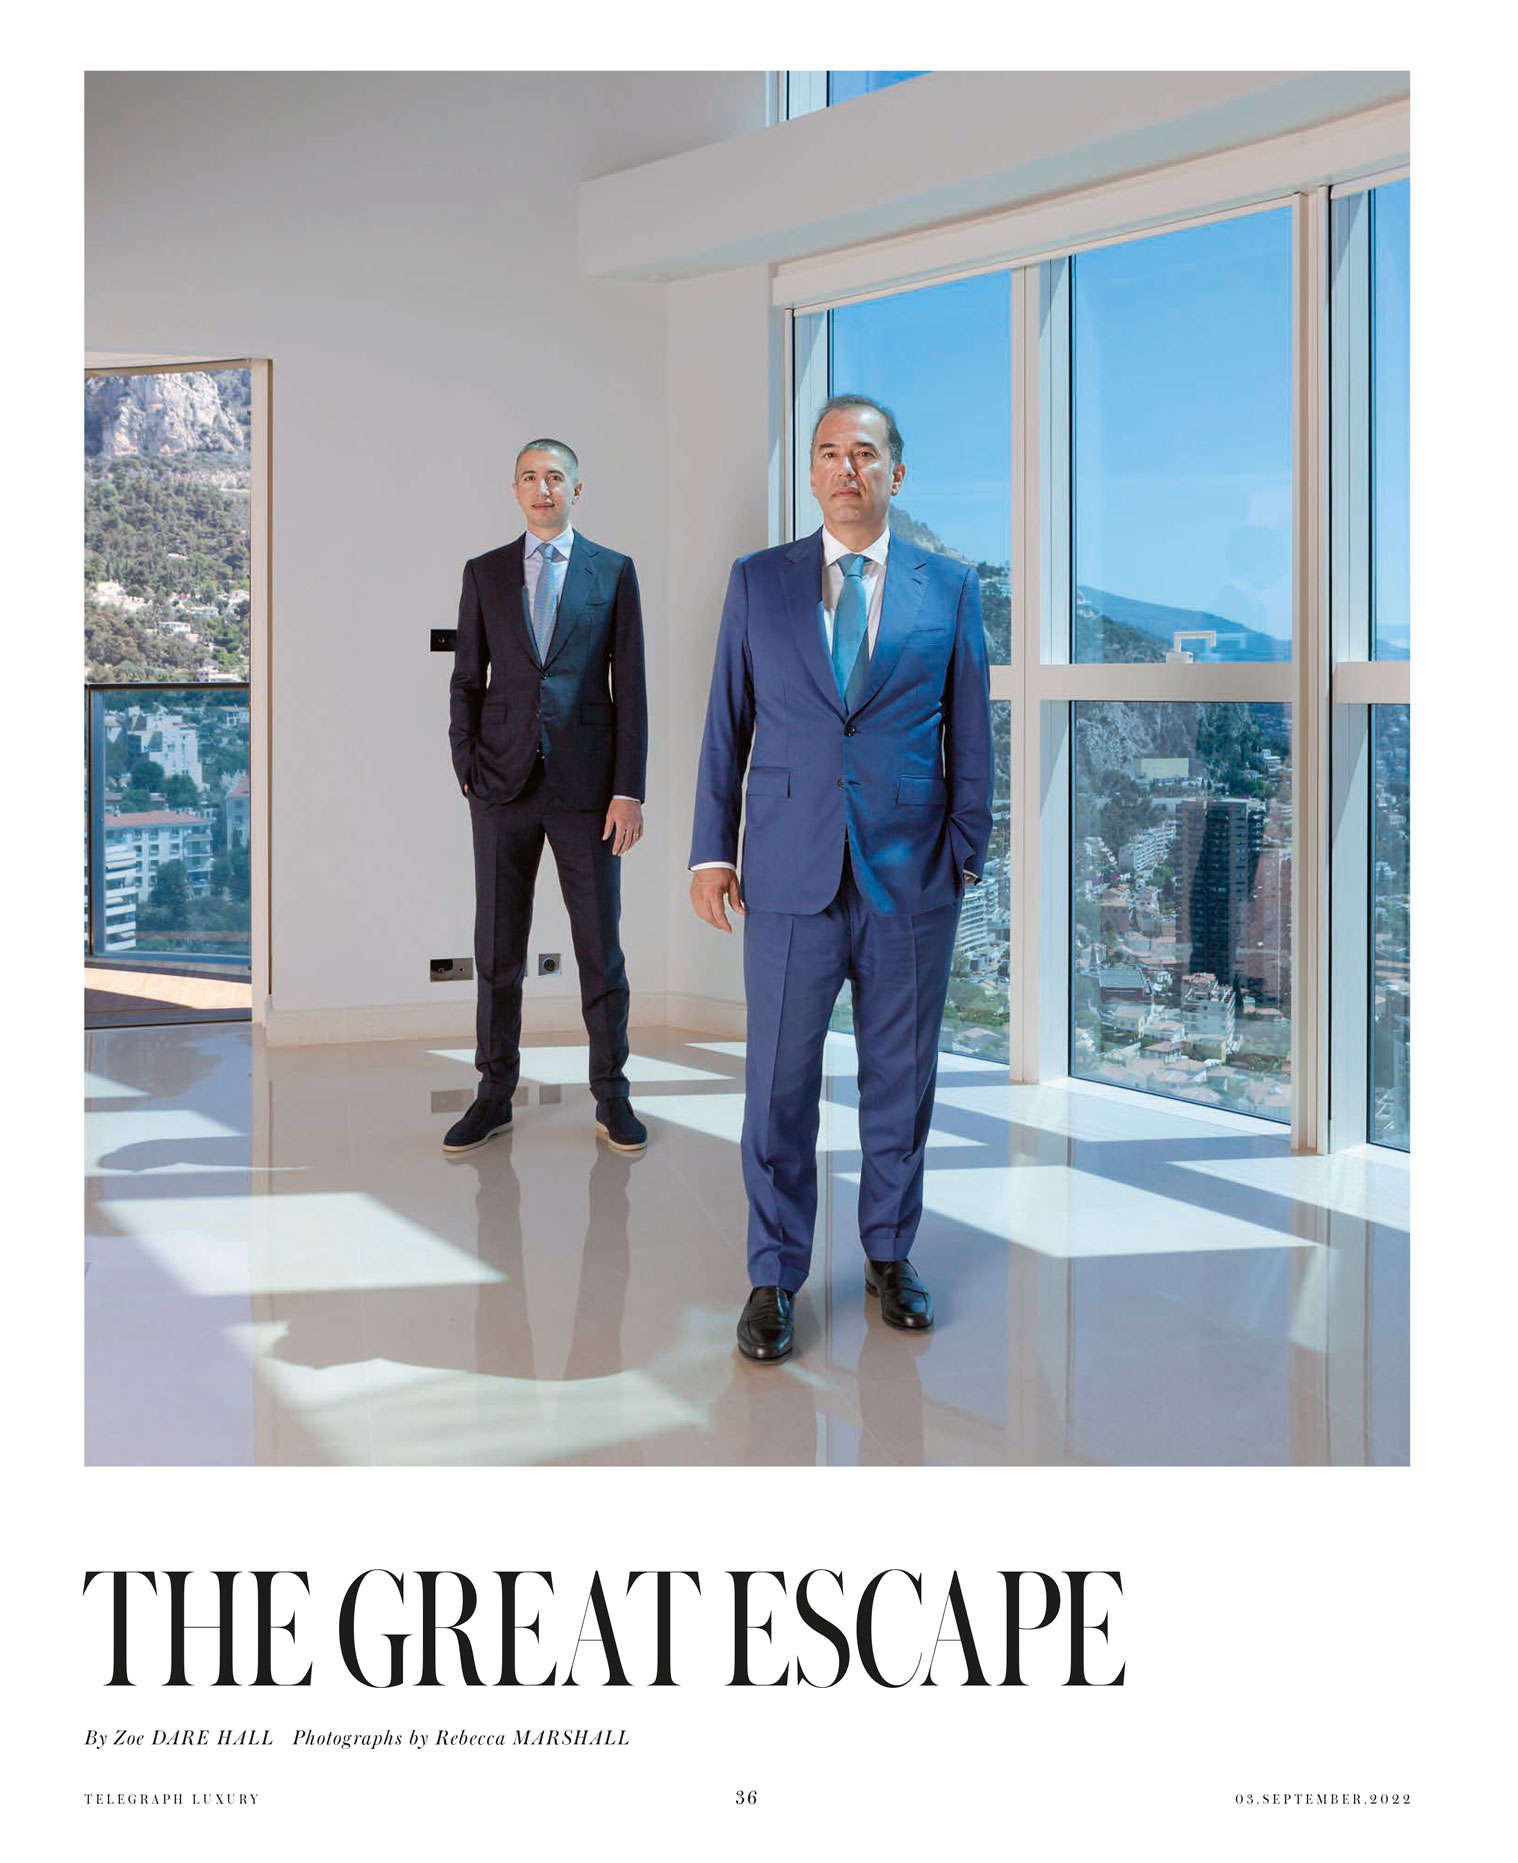 Opening page of magazine feature showing title 'The Great Escape' and a portrait of two men in suits by windows in a modern duplex apartment